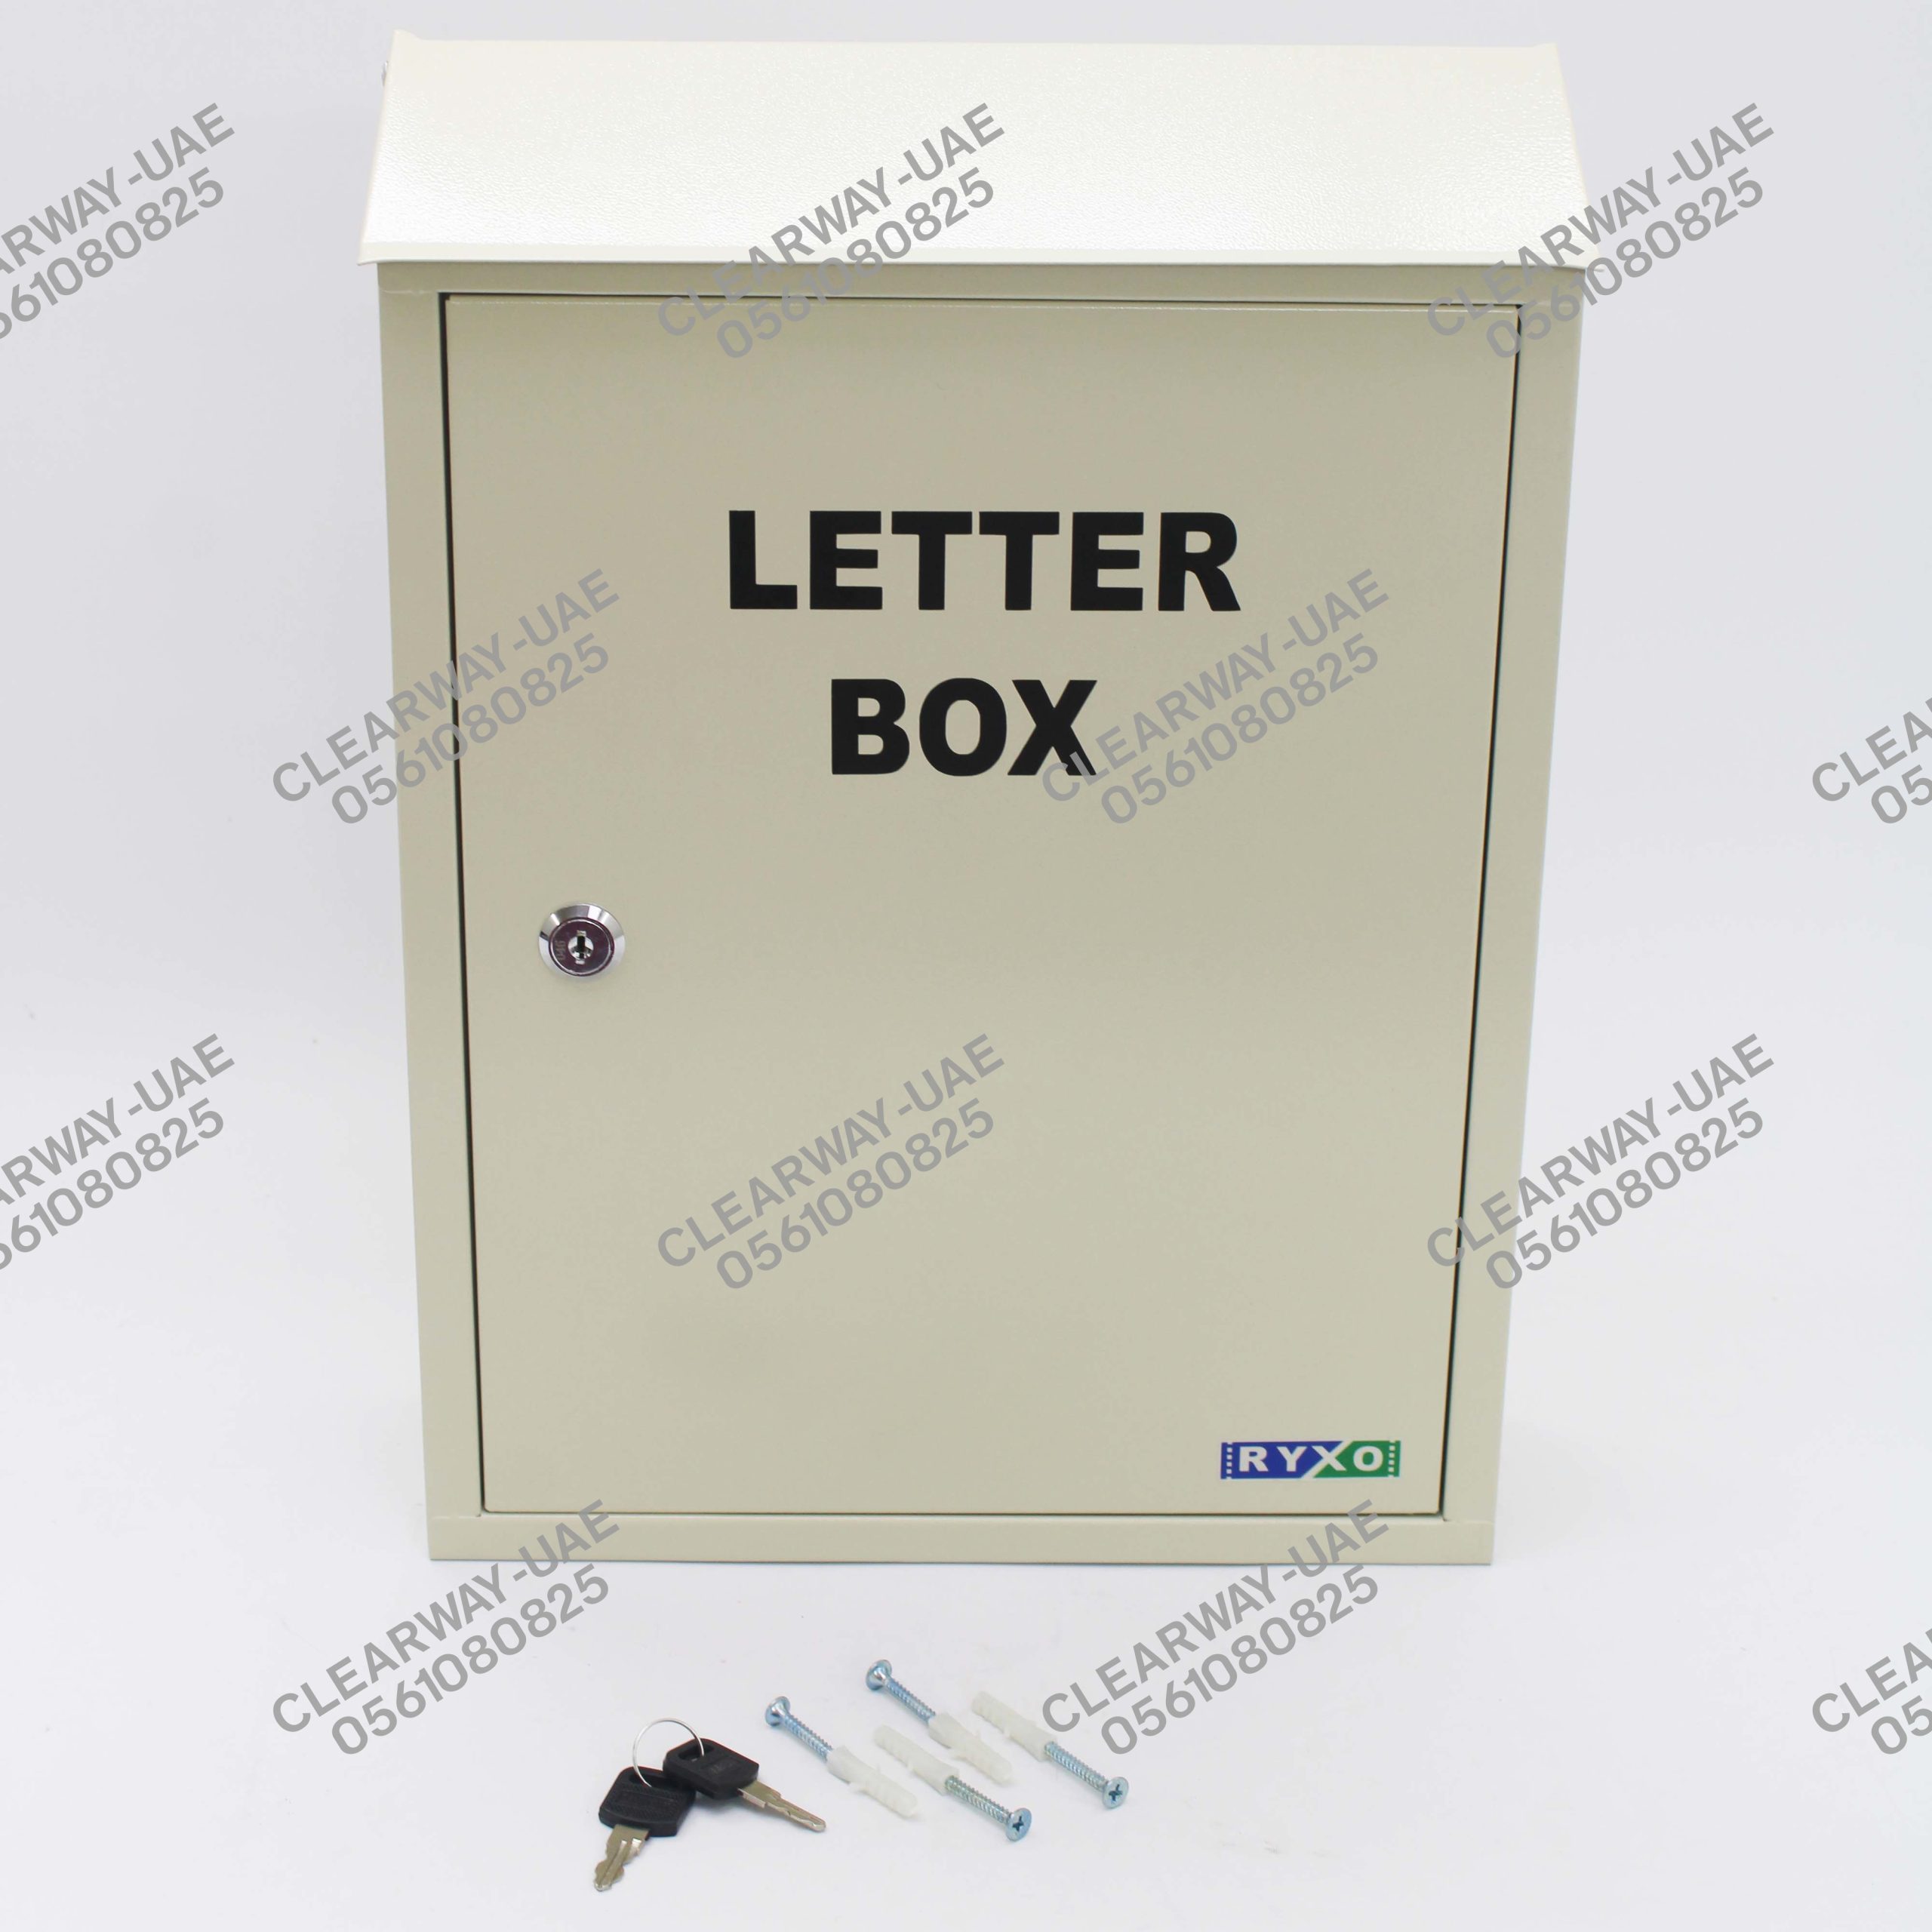 METAL LETTER BOX LARGE SUPPLIER UAE CLEARWAY RYXO SAFETY7